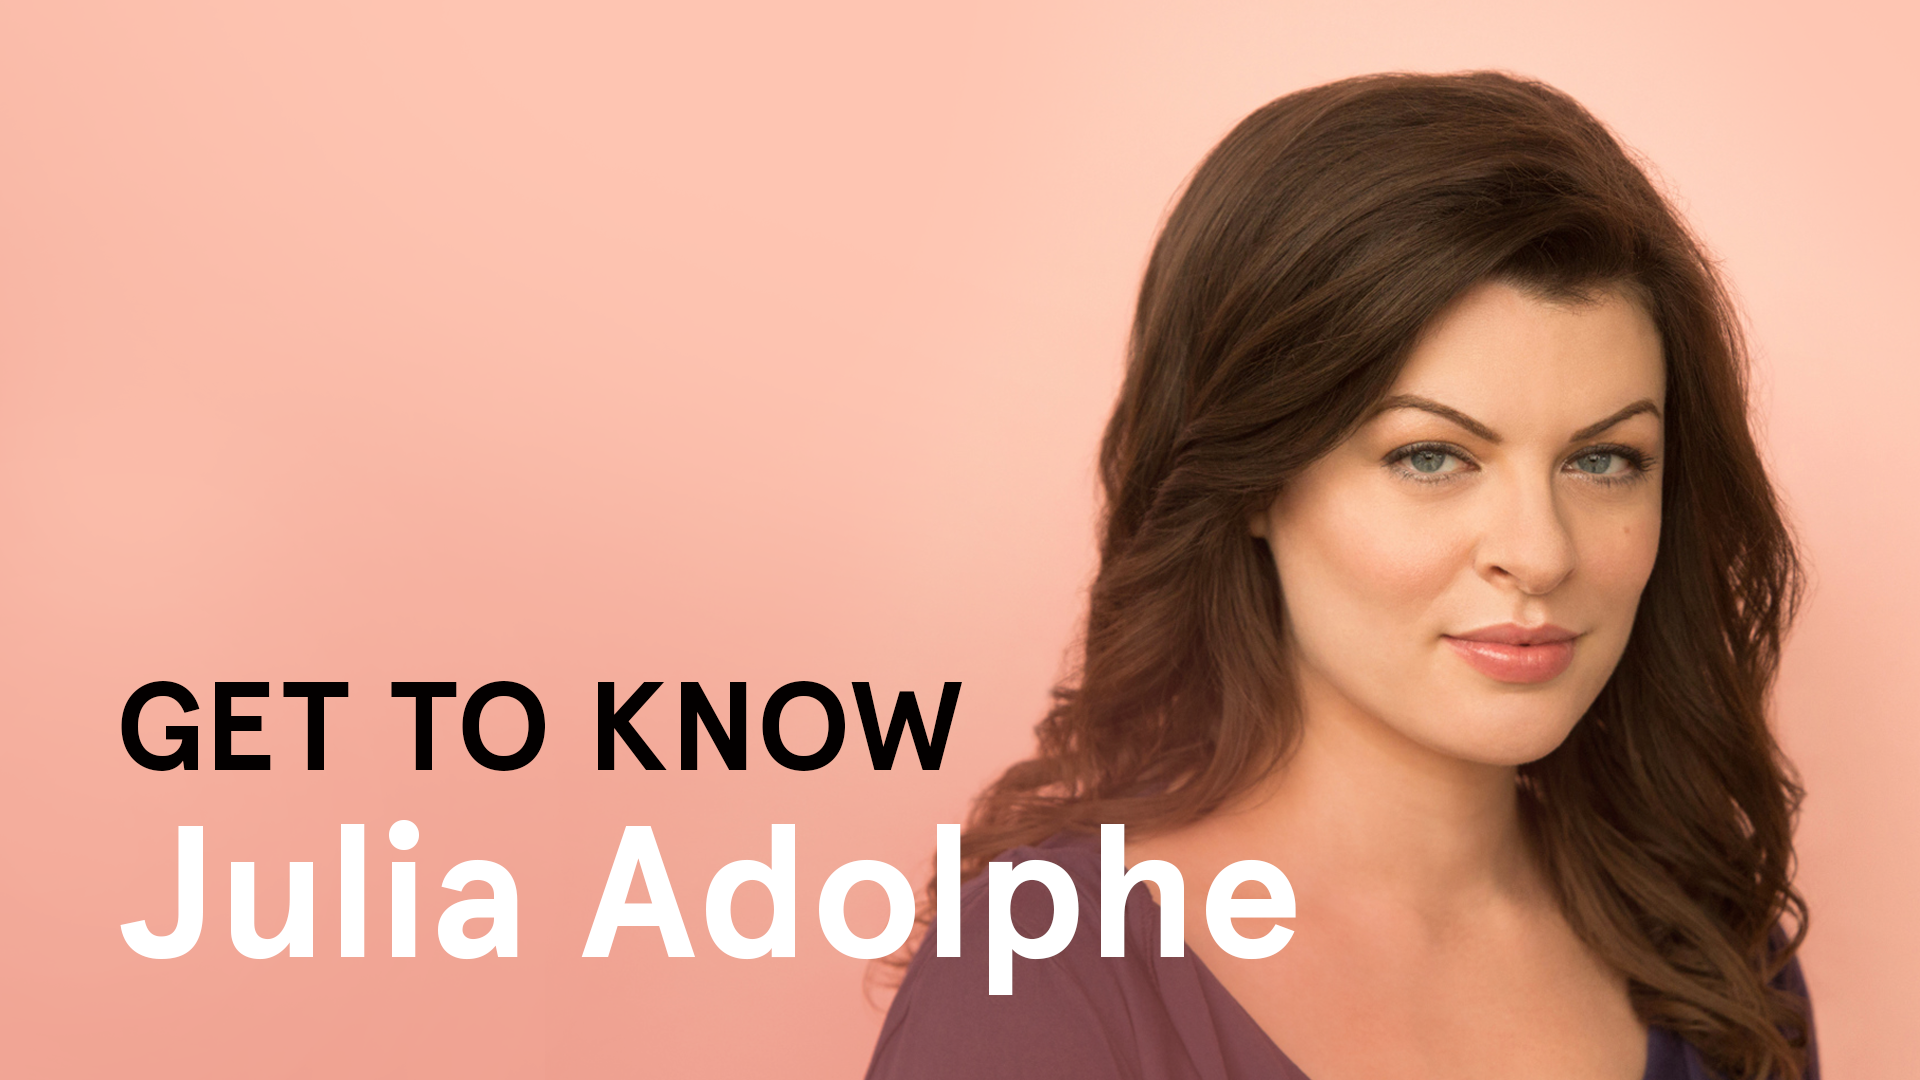 GET TO KNOW: JULIA ADOLPHE